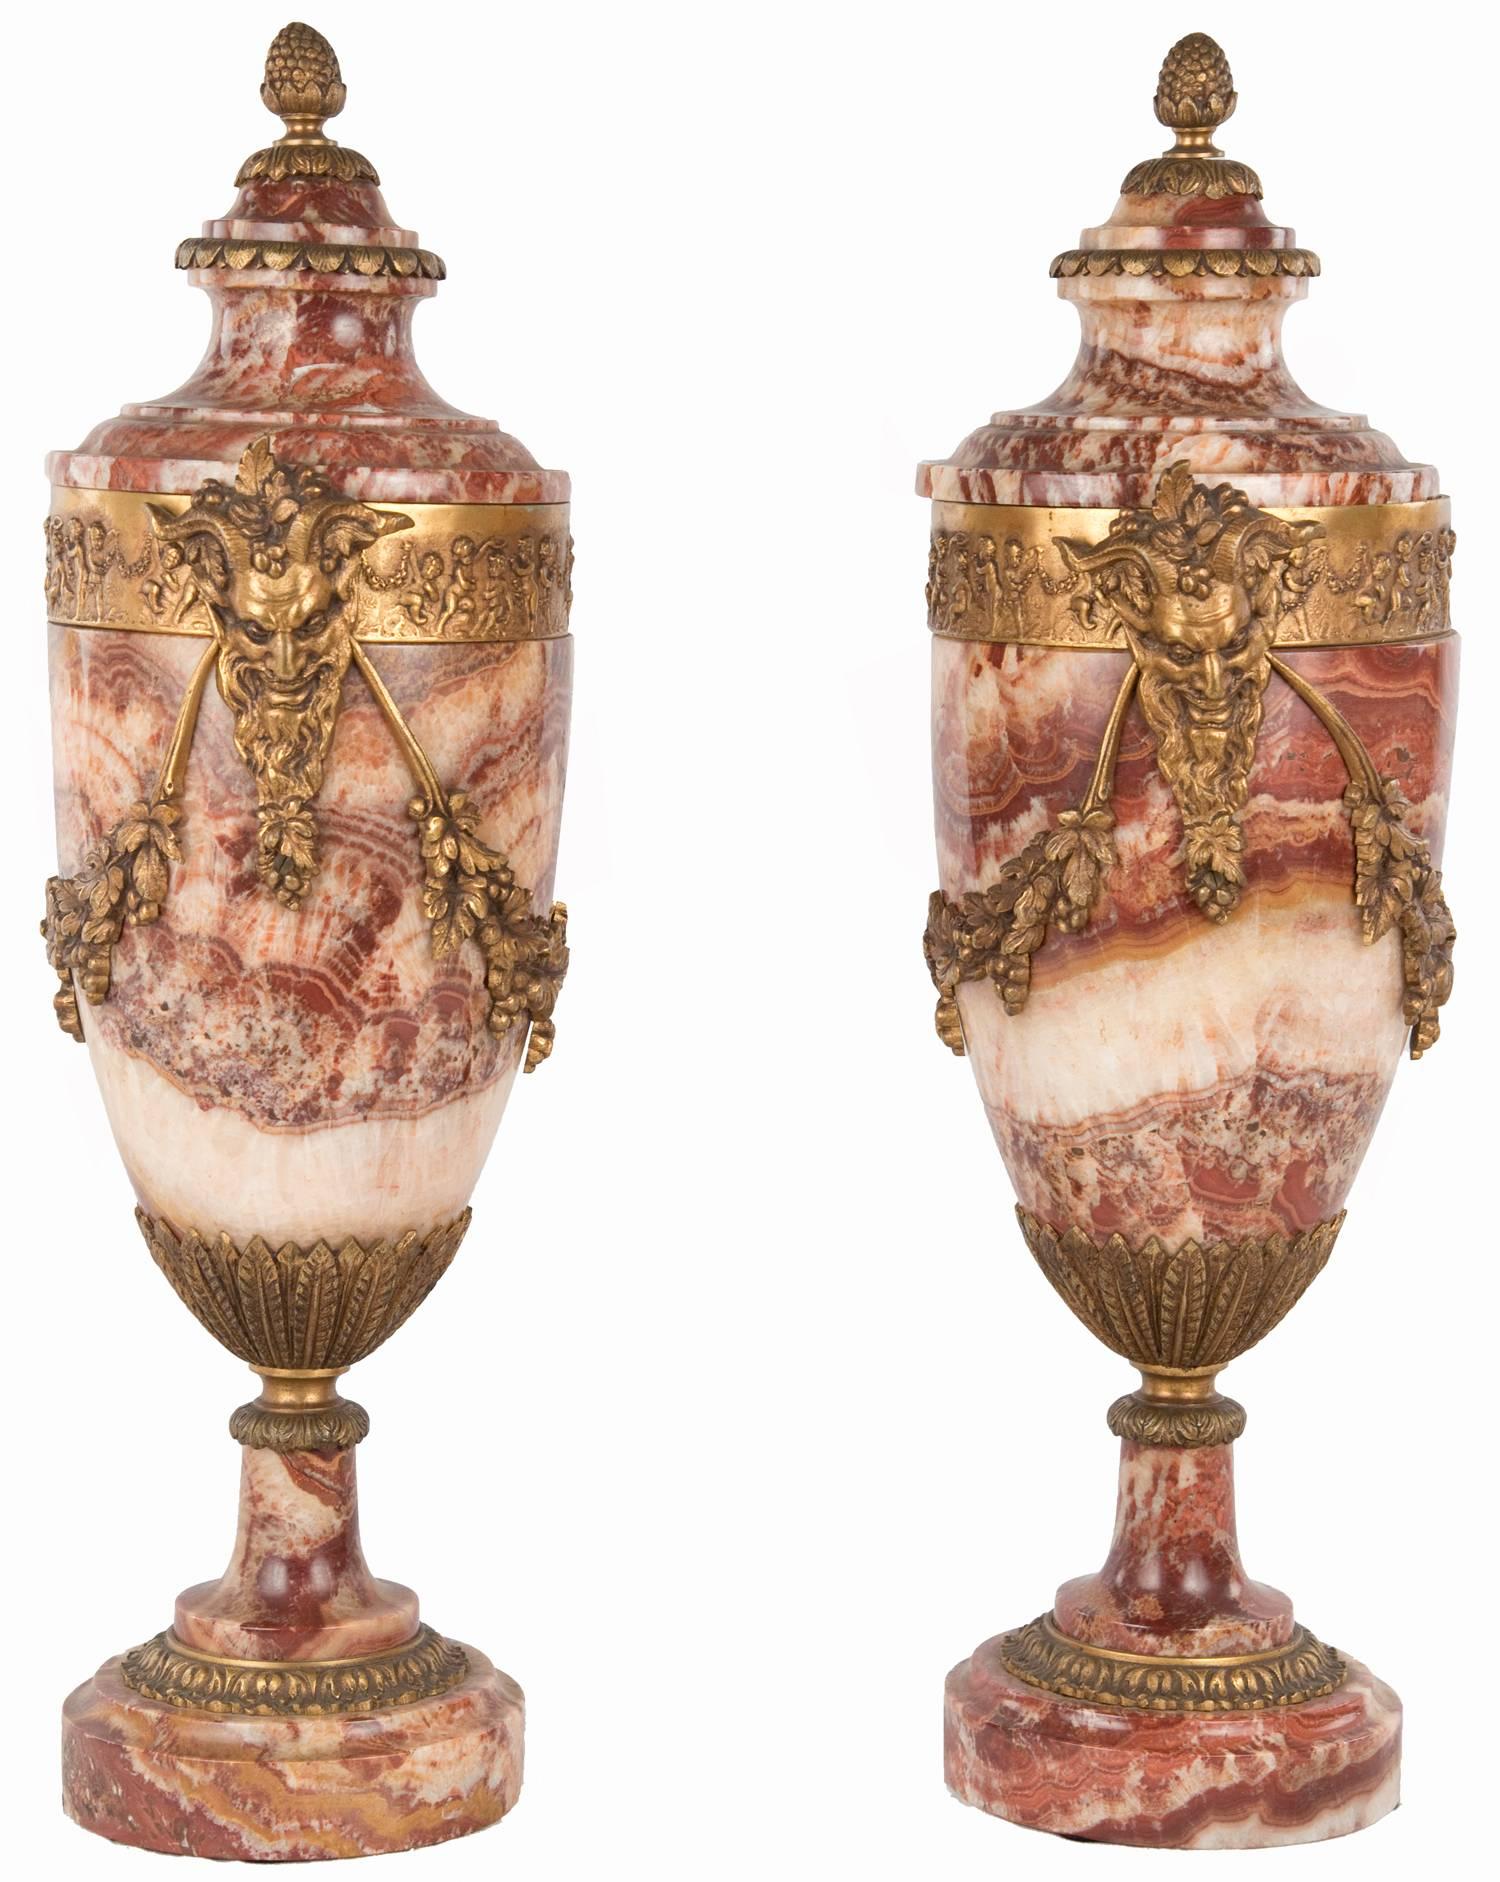 A pair of red and white breche marble urns of baluster form that are decorated with an ormolu band of dancing putti and satyr, or Bacchus, heads, from which hang a garland of grape bushels and leaves. Rings of gilt bronze acanthus leaves further